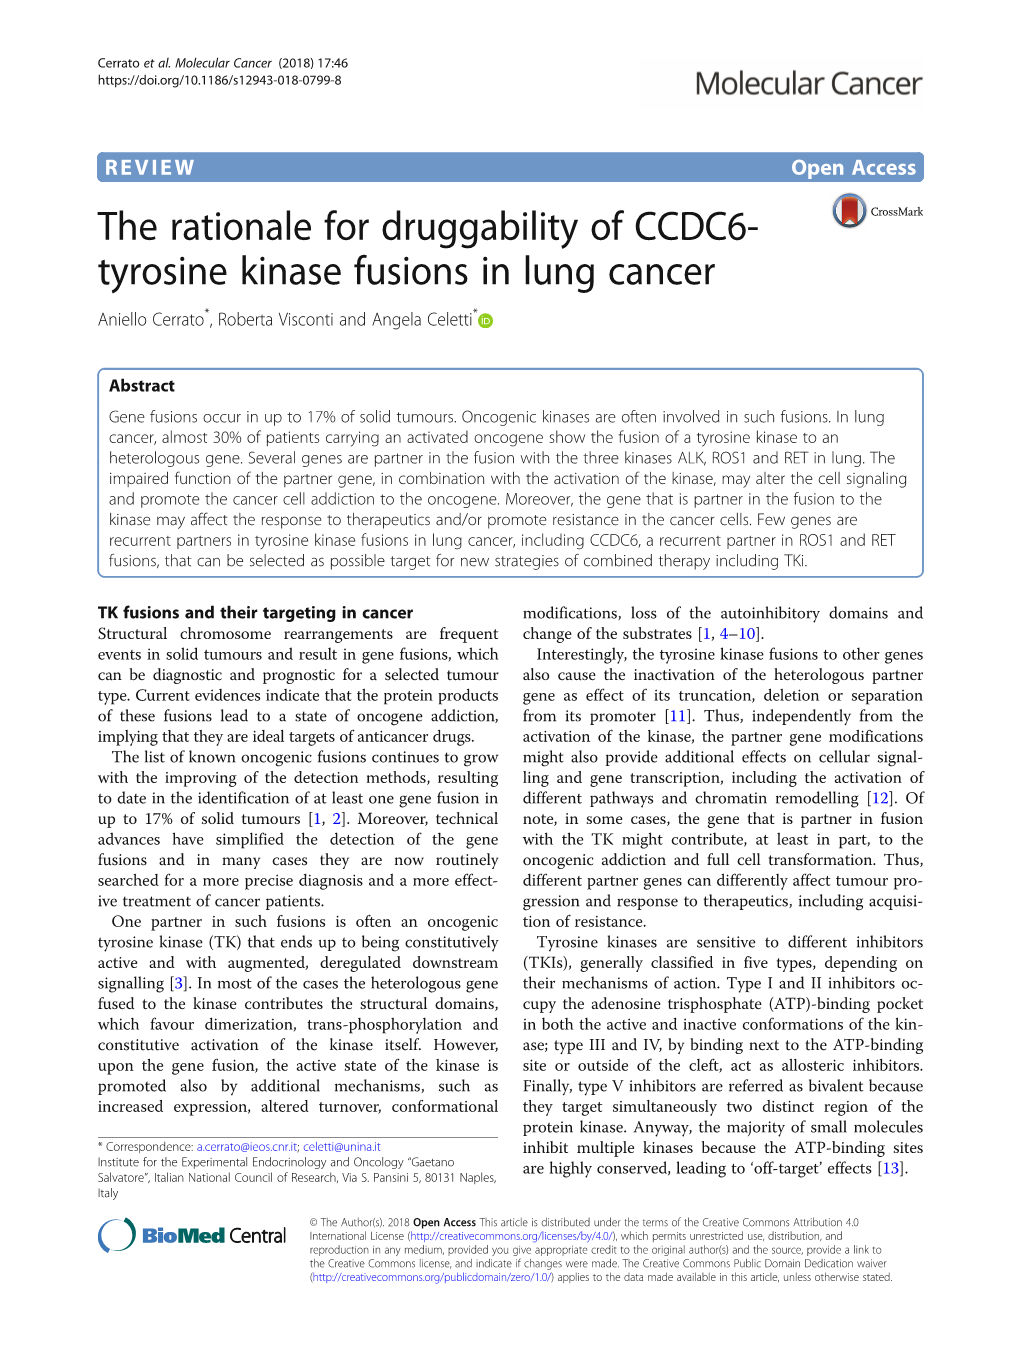 The Rationale for Druggability of CCDC6-Tyrosine Kinase Fusions In